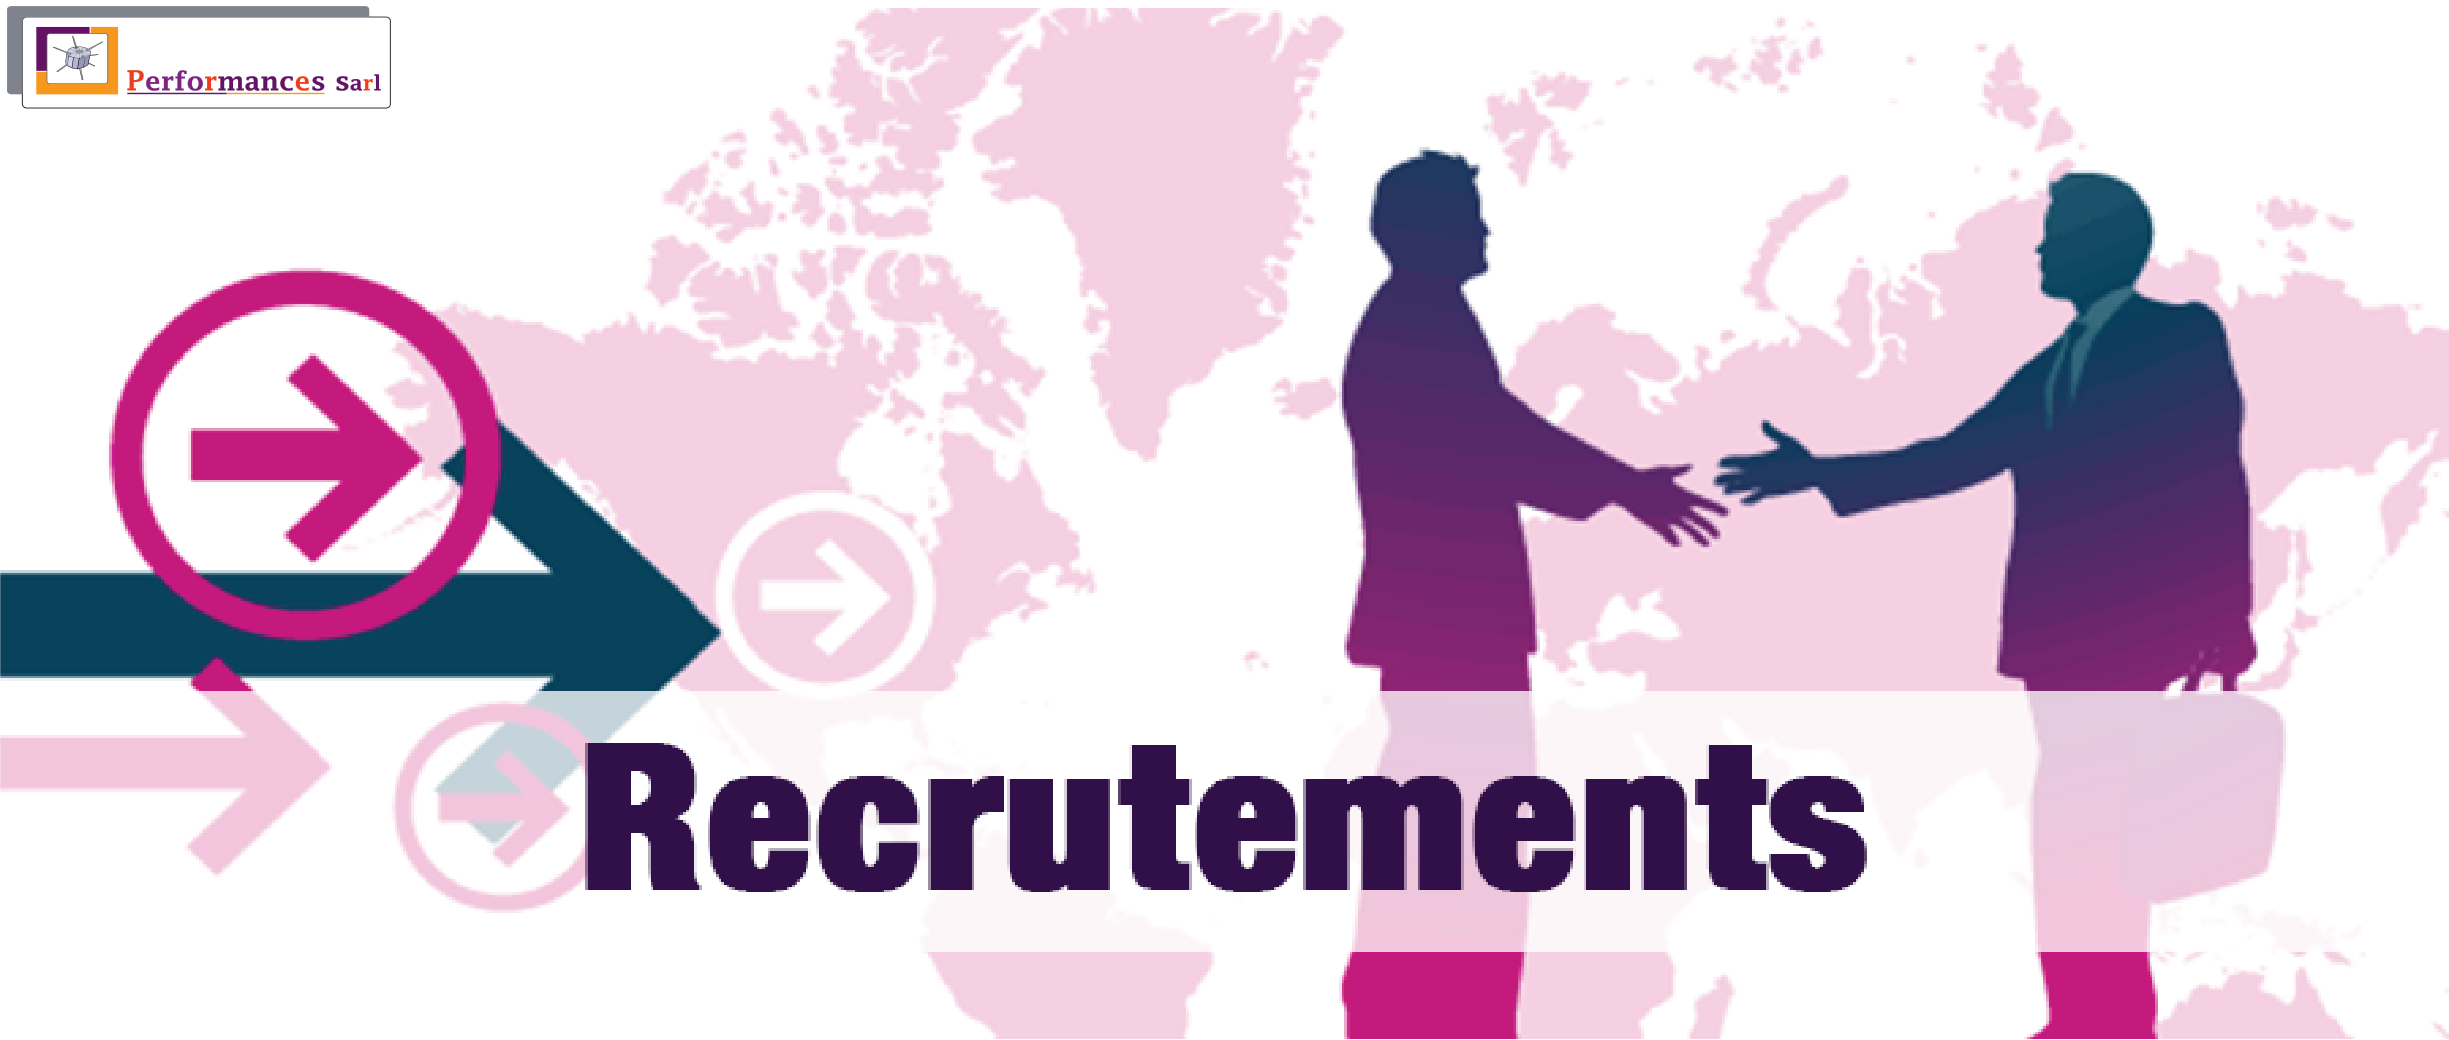 RECRUTEMENTS & PLACEMENTS